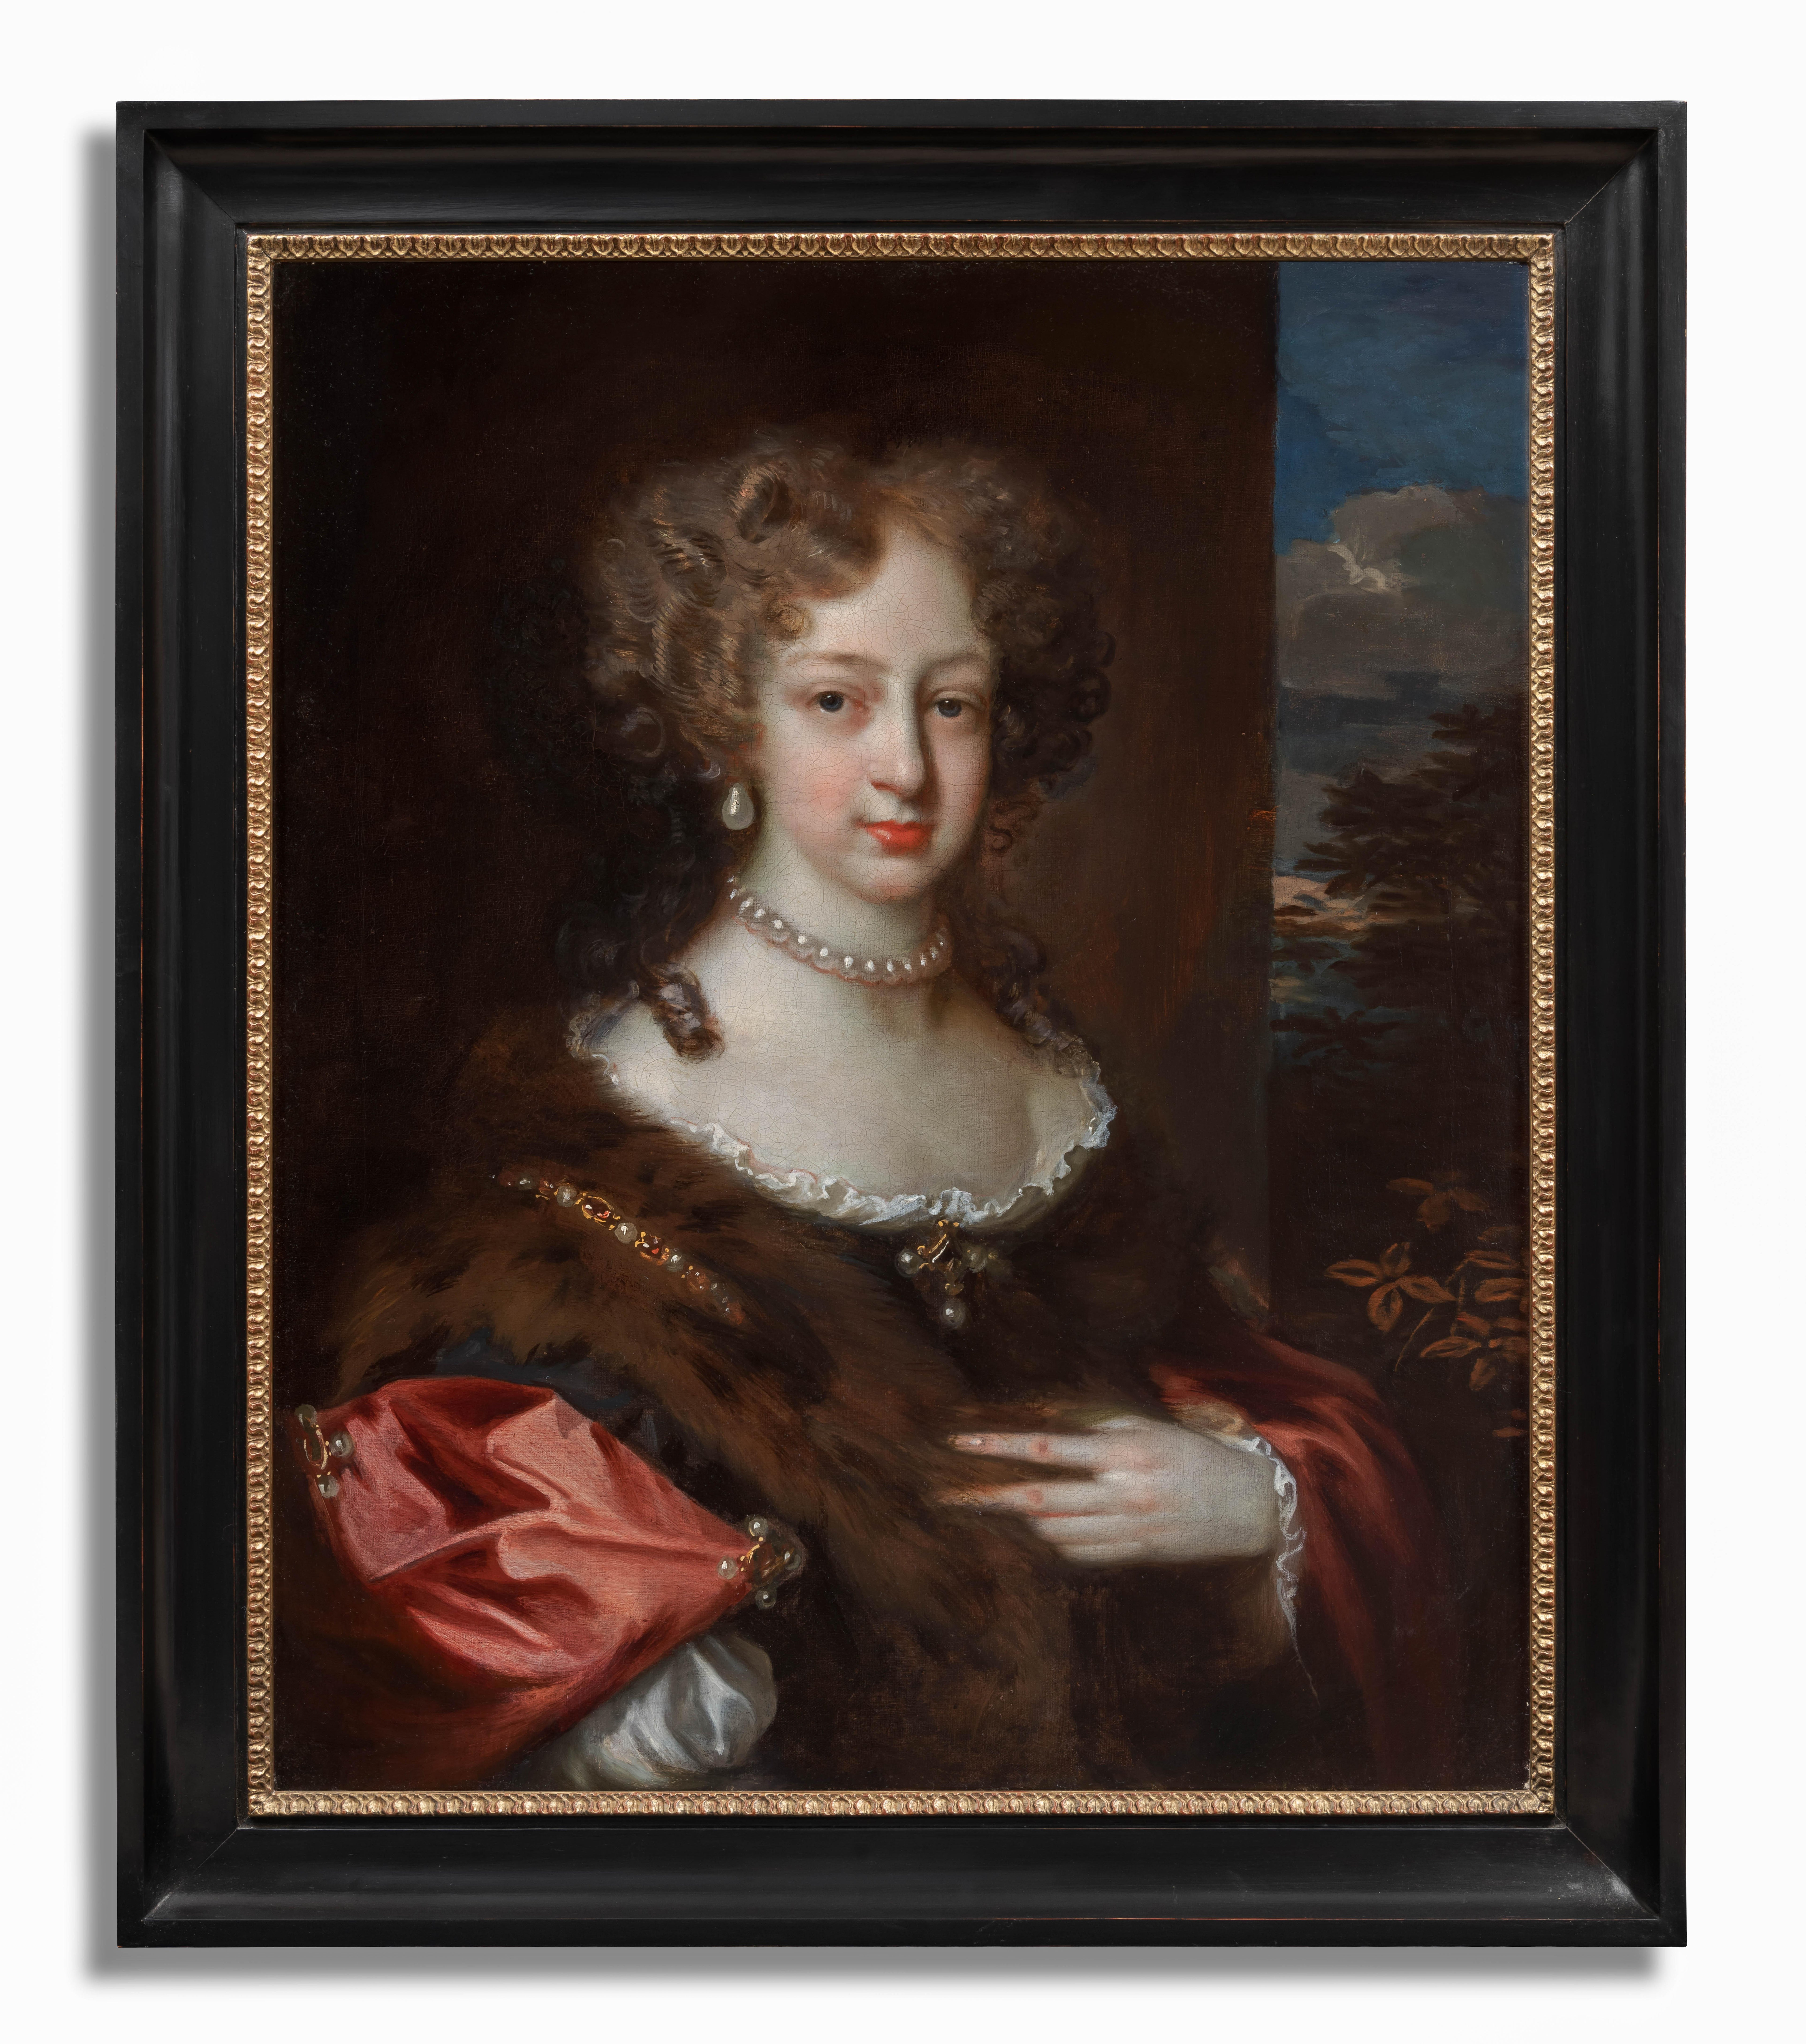 Circle of Gerard Soest Portrait Painting - Portrait of a Lady with Crimson Wrap & Fur c.1675 Fine Dutch Old Master Painting